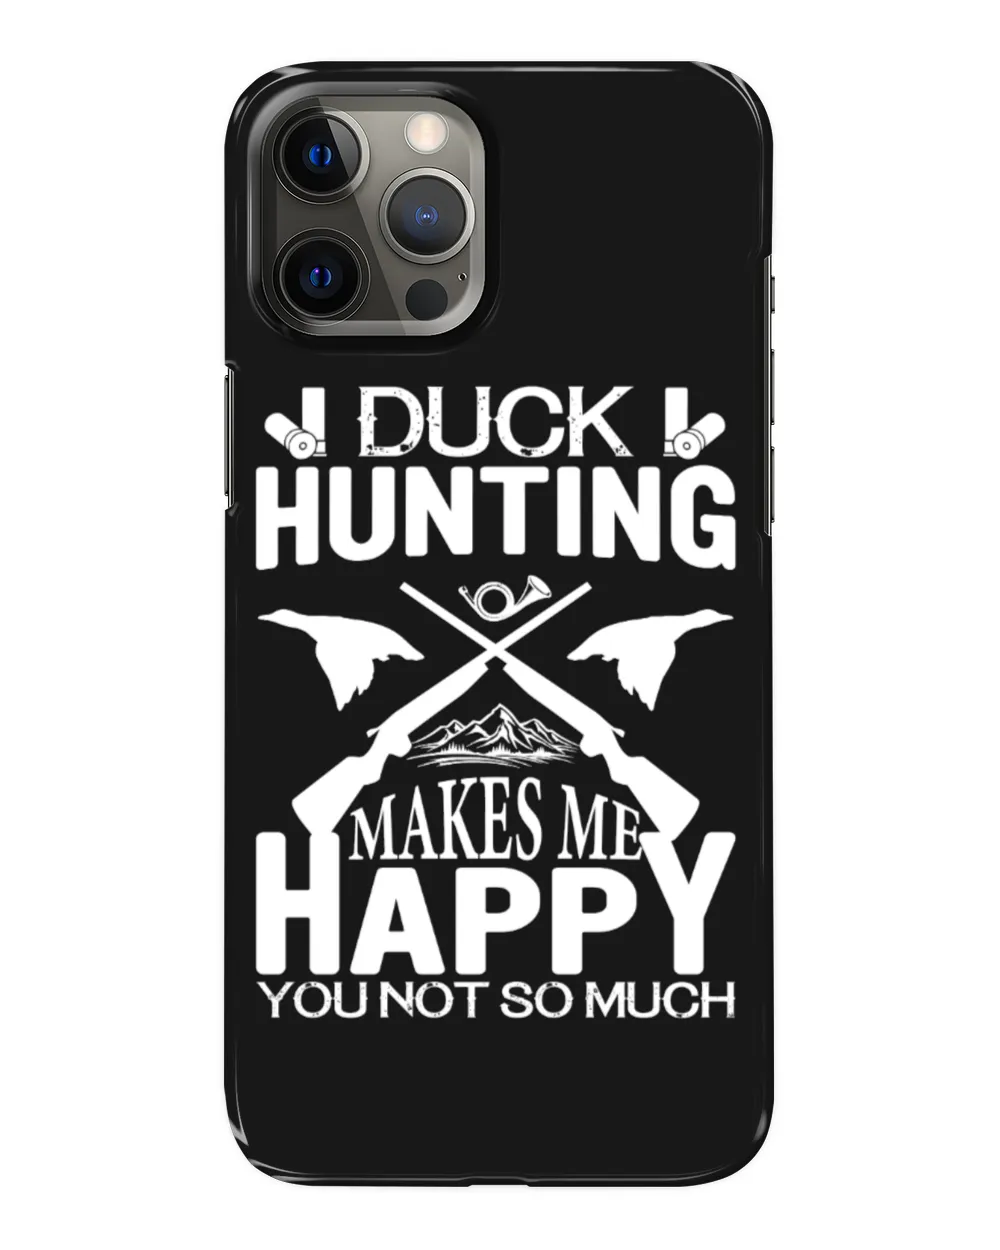 Hunting Duck Hunting Makes Me Happy You Not So Much